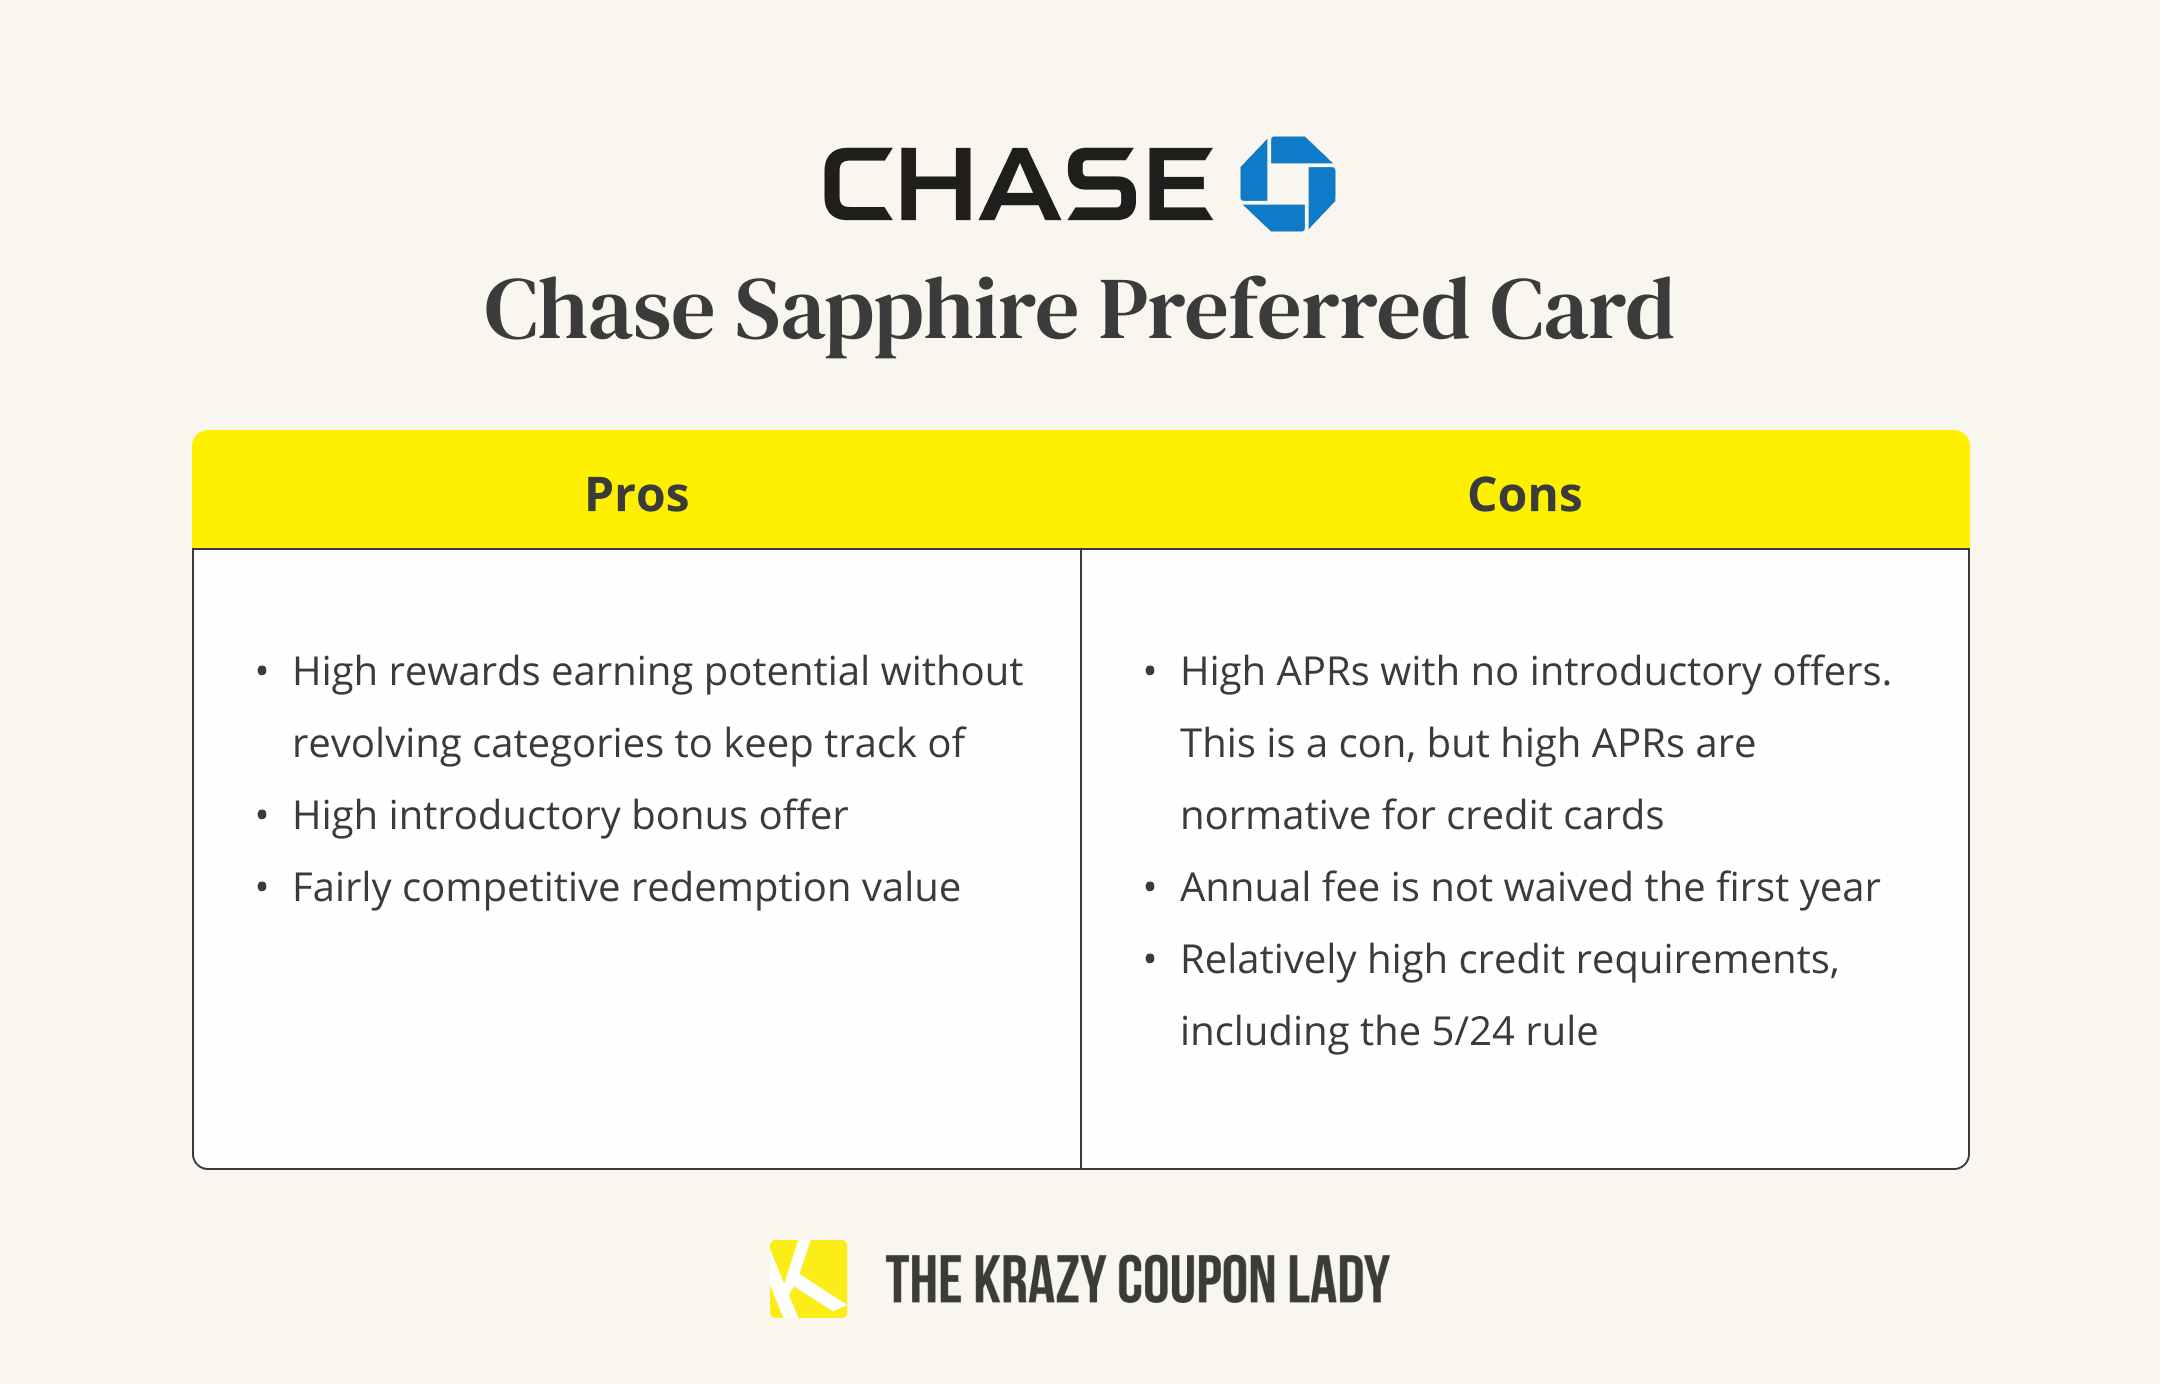 A graphic showing the pros and cons of the Chase Sapphire Preferred credit card